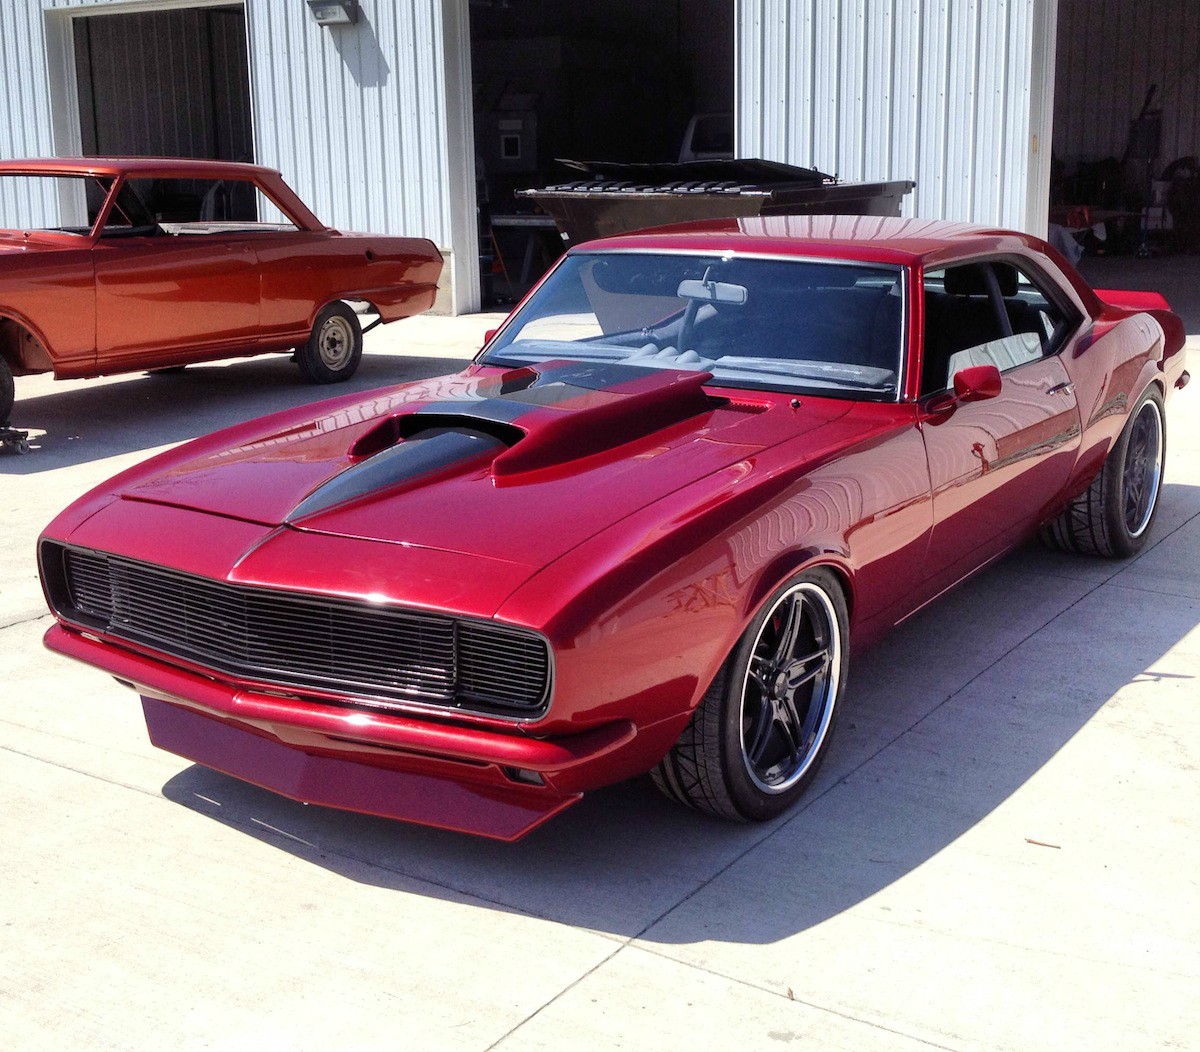 Michael Coil's '68 Excessive Muscle Camaro on Grip Equipped Schis...